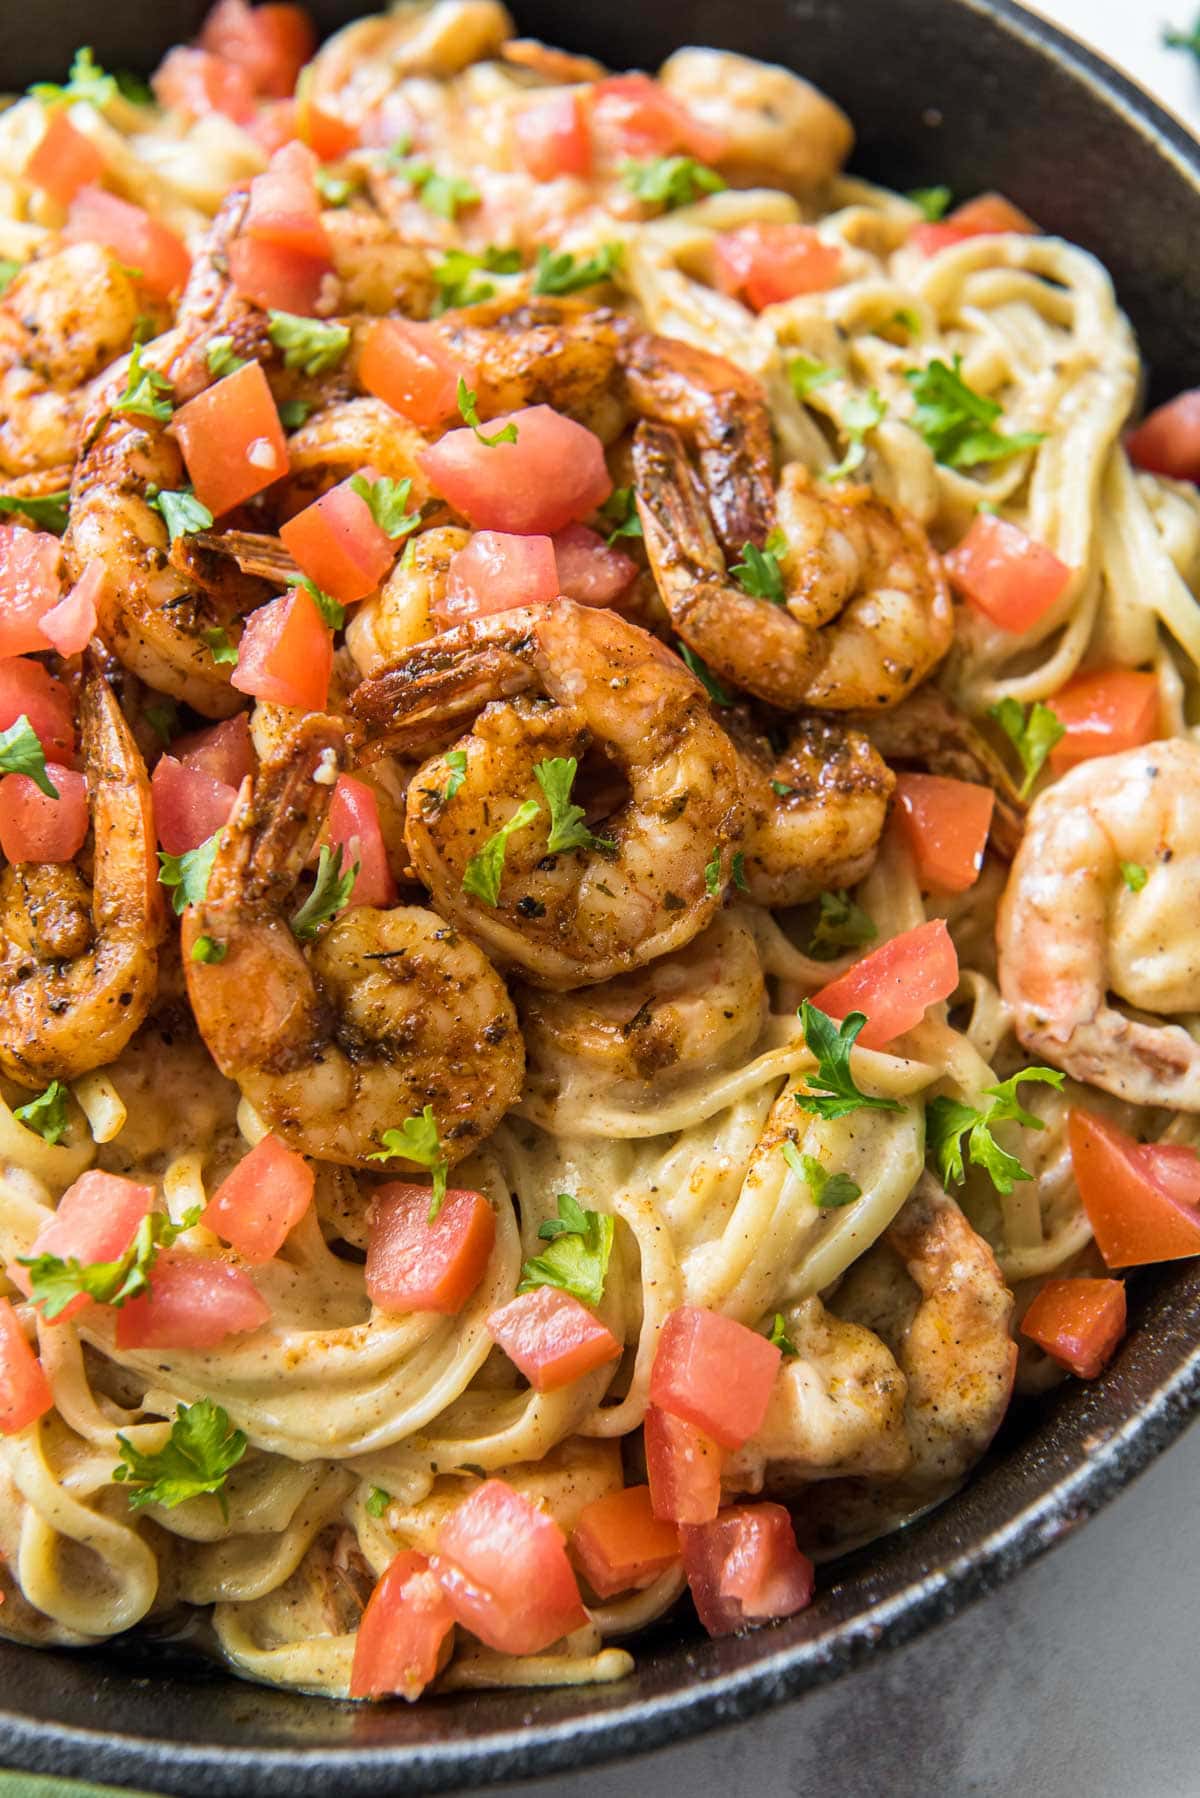 cajun shrimp pasta with diced tomatoes in a cast iron skillet